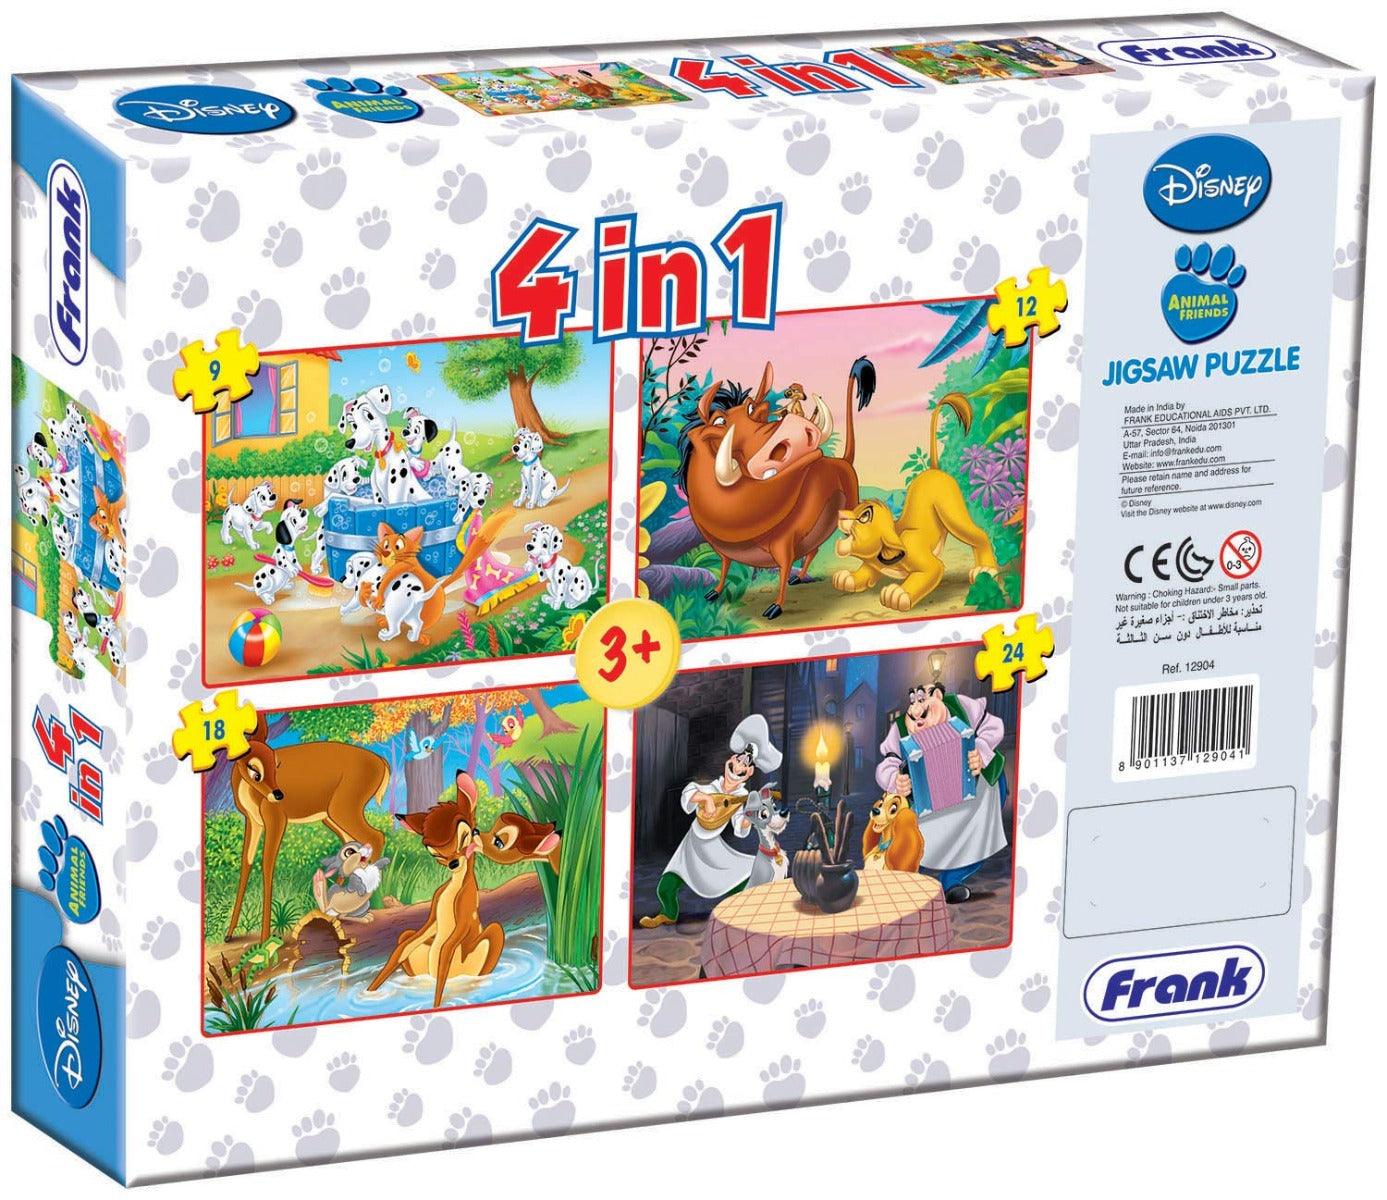 Frank Disney Animal Friends 4 in 1 Puzzles - A Set of 4 Jigsaw Puzzles for 3 Year Old Kids and Above